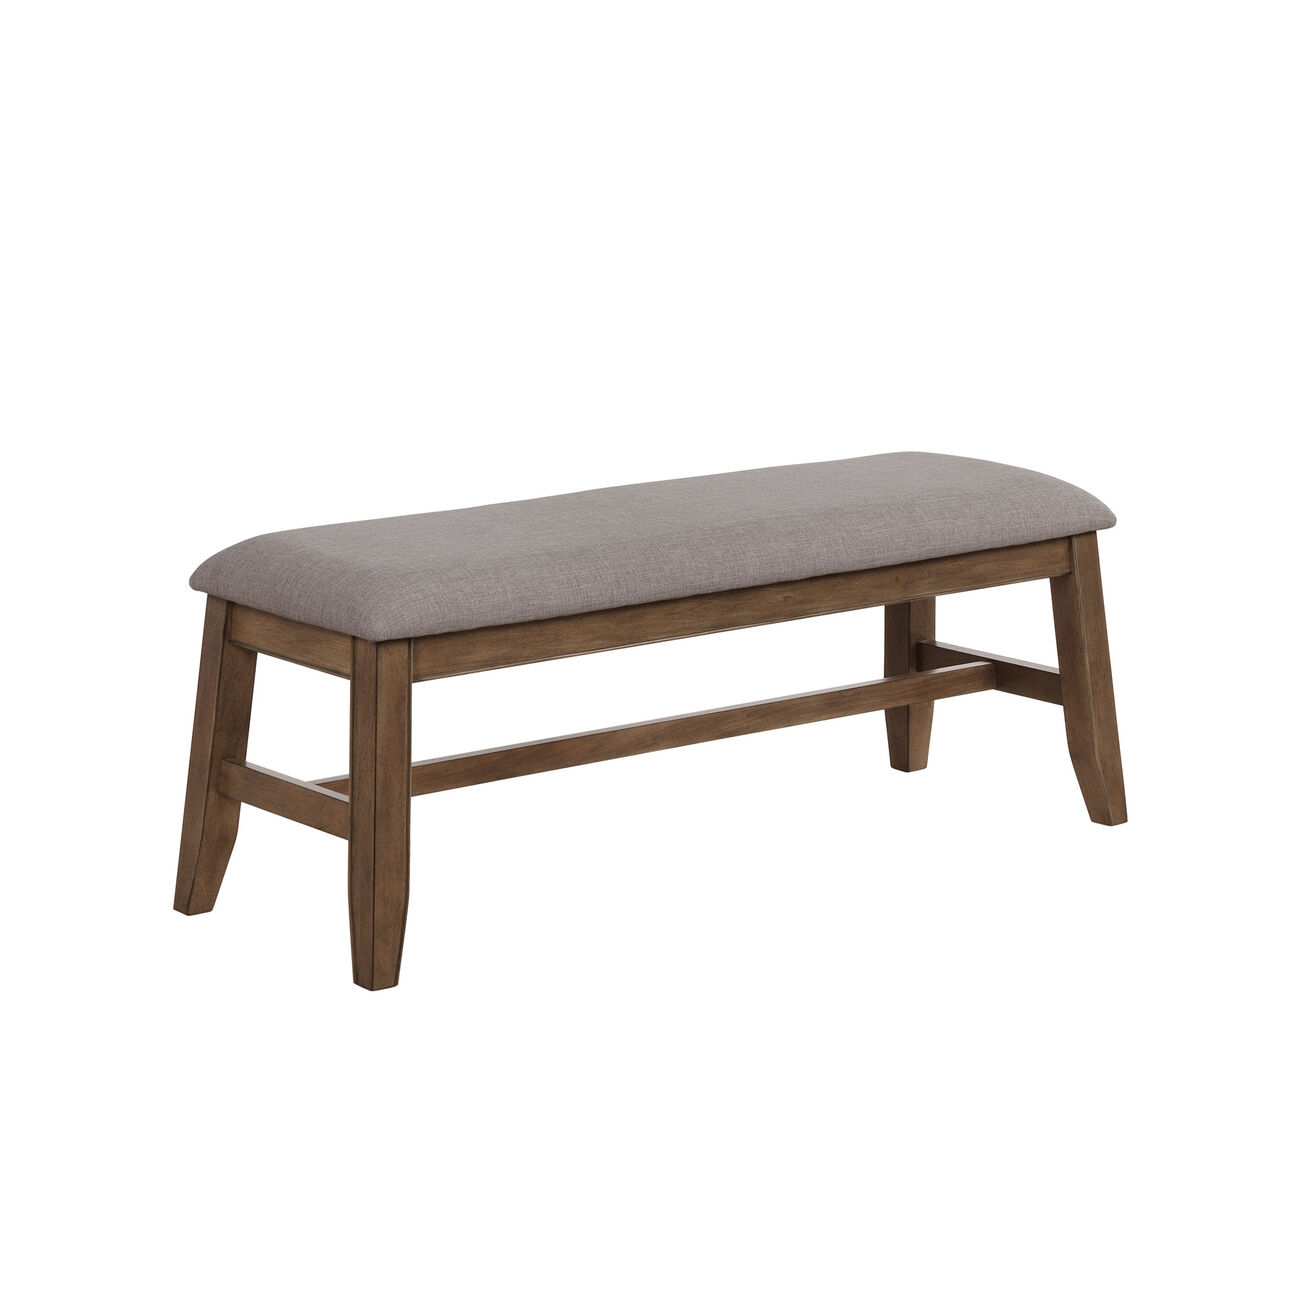 Wooden Bench with Fabric Upholstered Seat and Angled Legs, Brown and Gray - BM215445